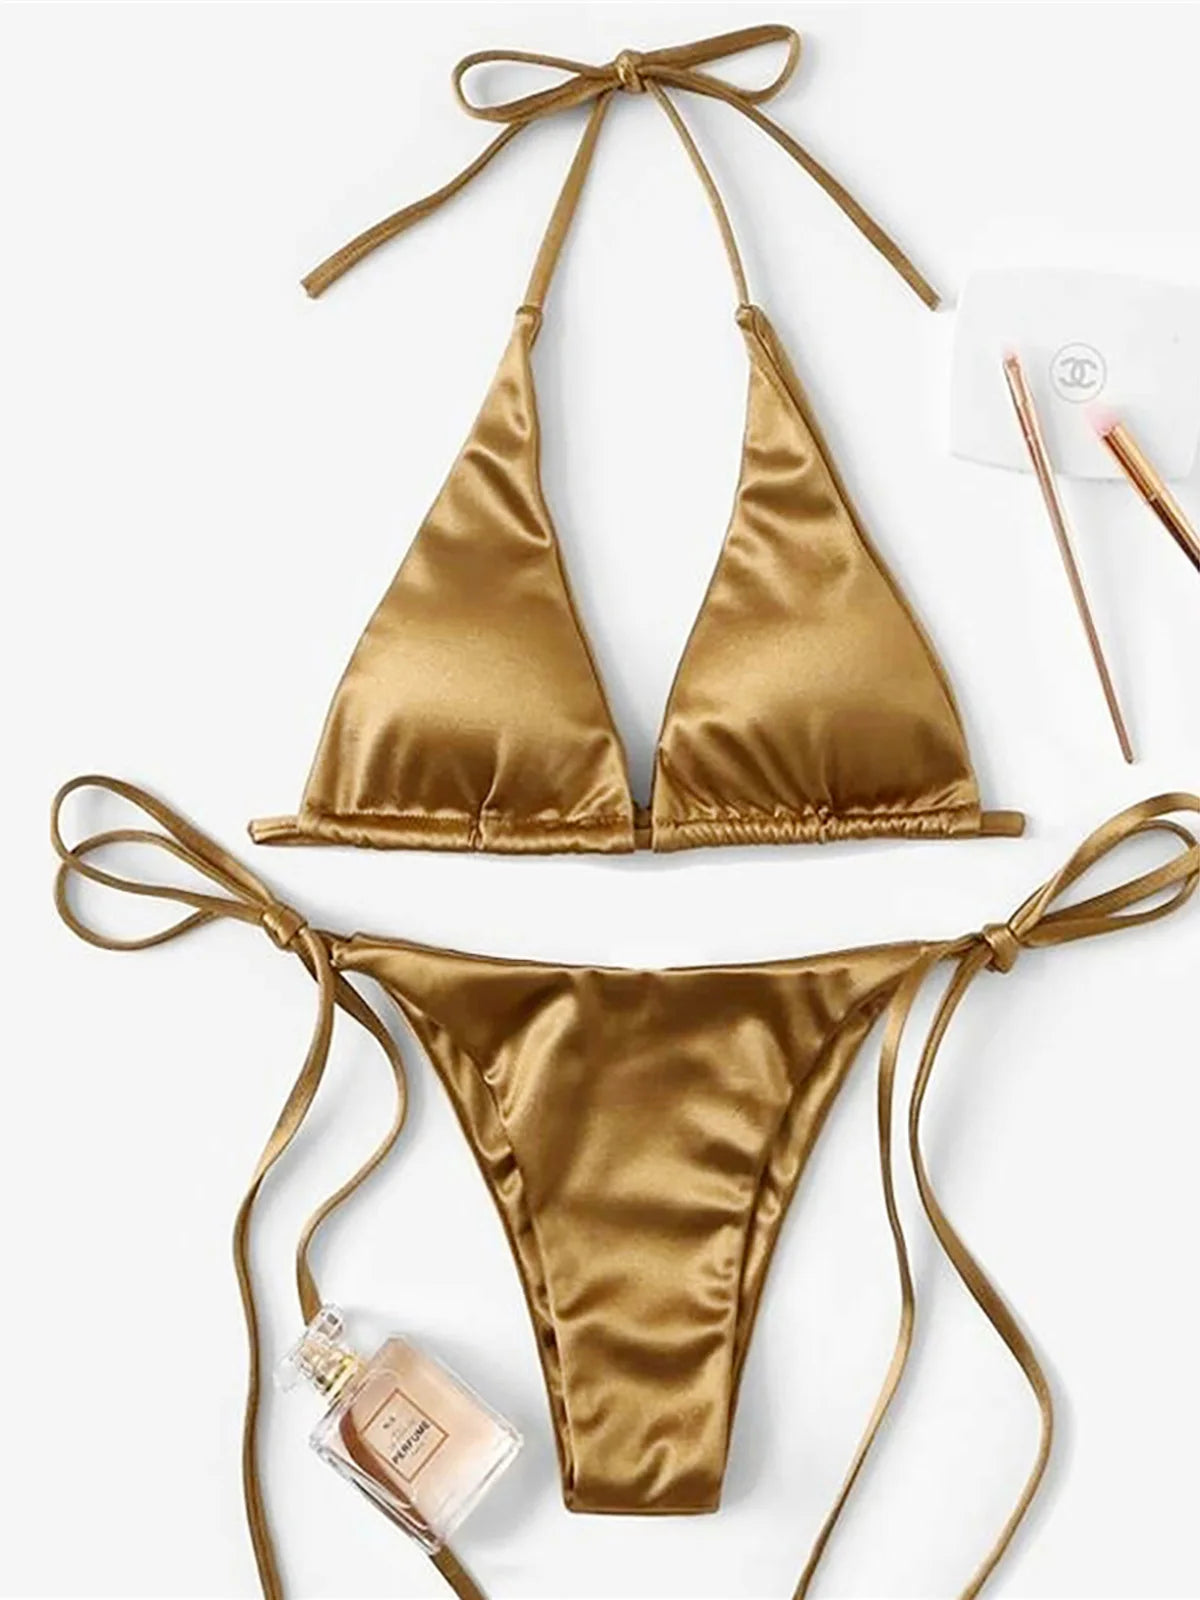 Luxurious Two-Piece Satin Halter Brazilian Padded Bikini Set for Women - Nylon and Spandex Swimwear with Wire Free Support, True to Size Fit, Low Waist - Available in Multiple Colors